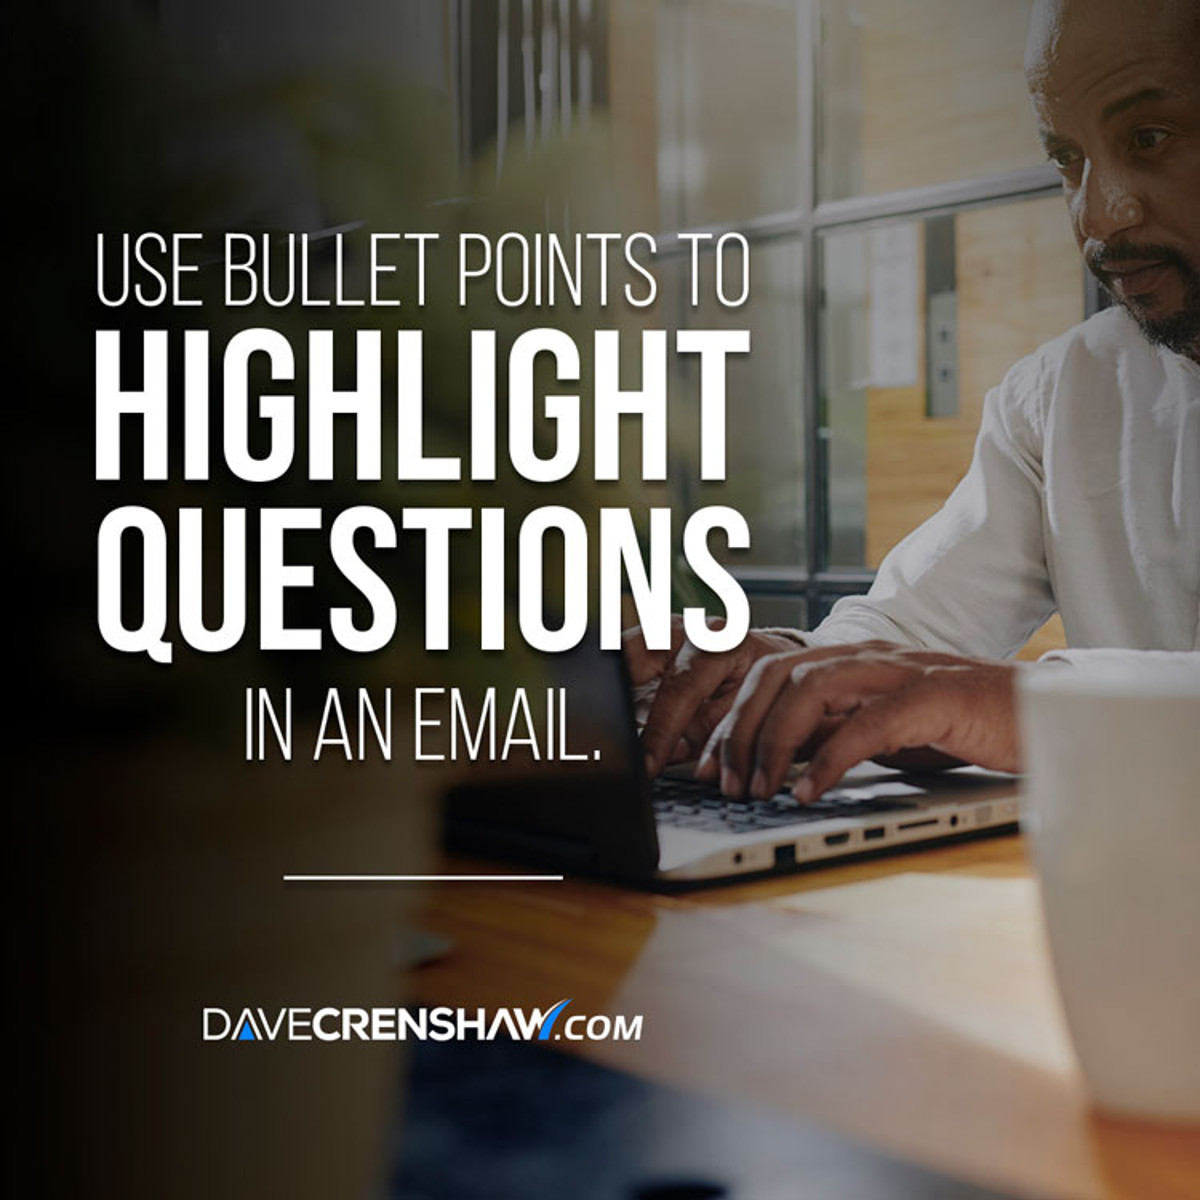 Use bullet points to highlight questions in an email